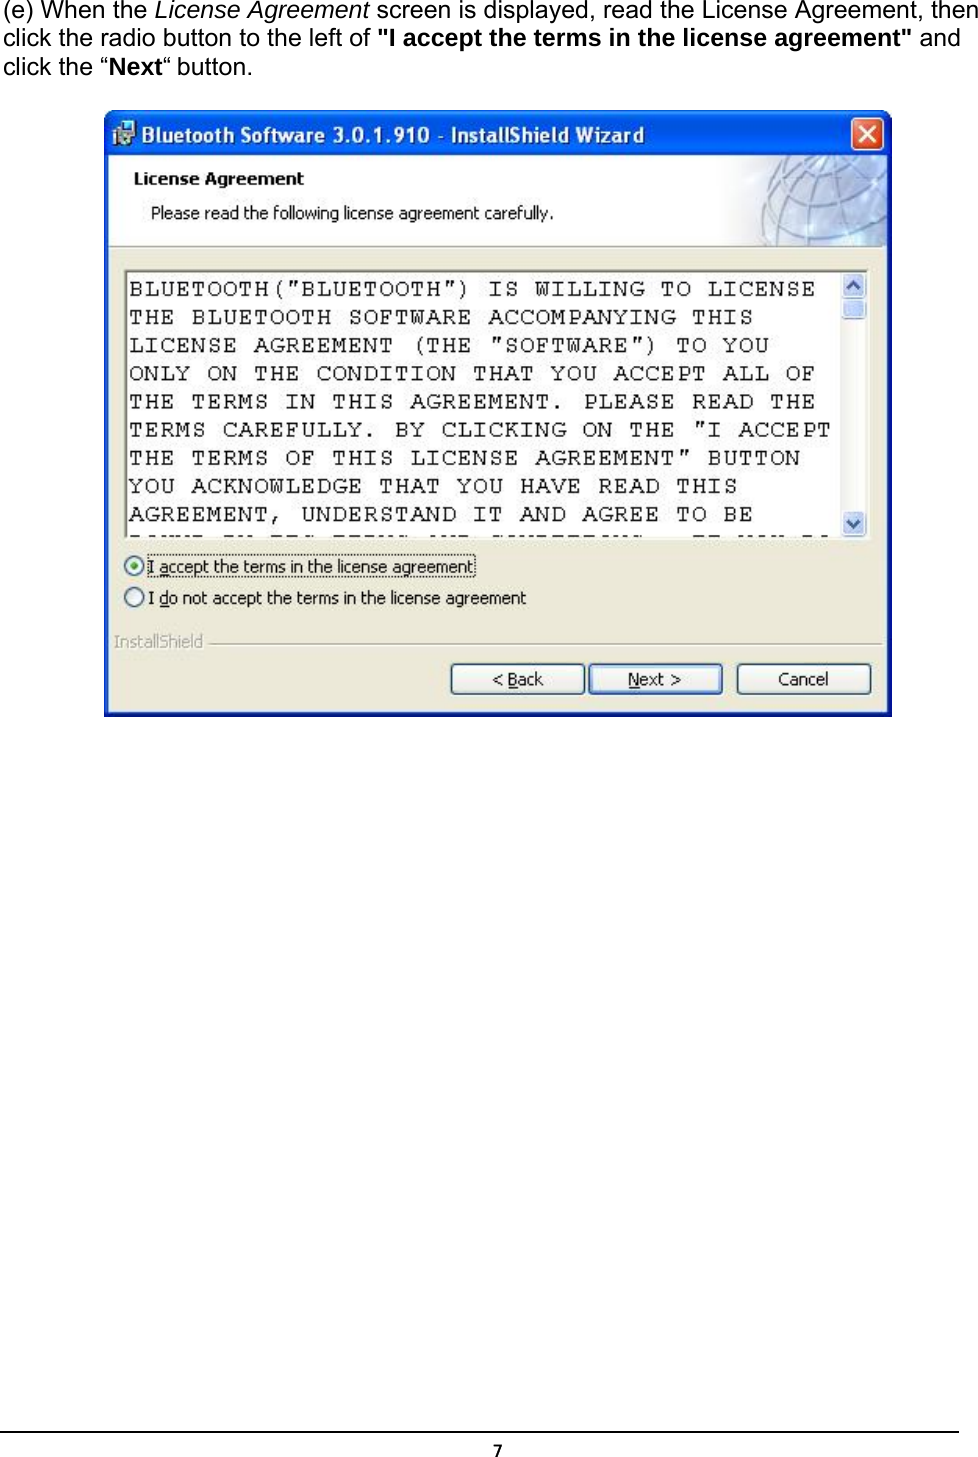   7(e) When the License Agreement screen is displayed, read the License Agreement, then click the radio button to the left of &quot;I accept the terms in the license agreement&quot; and click the “Next“ button.  